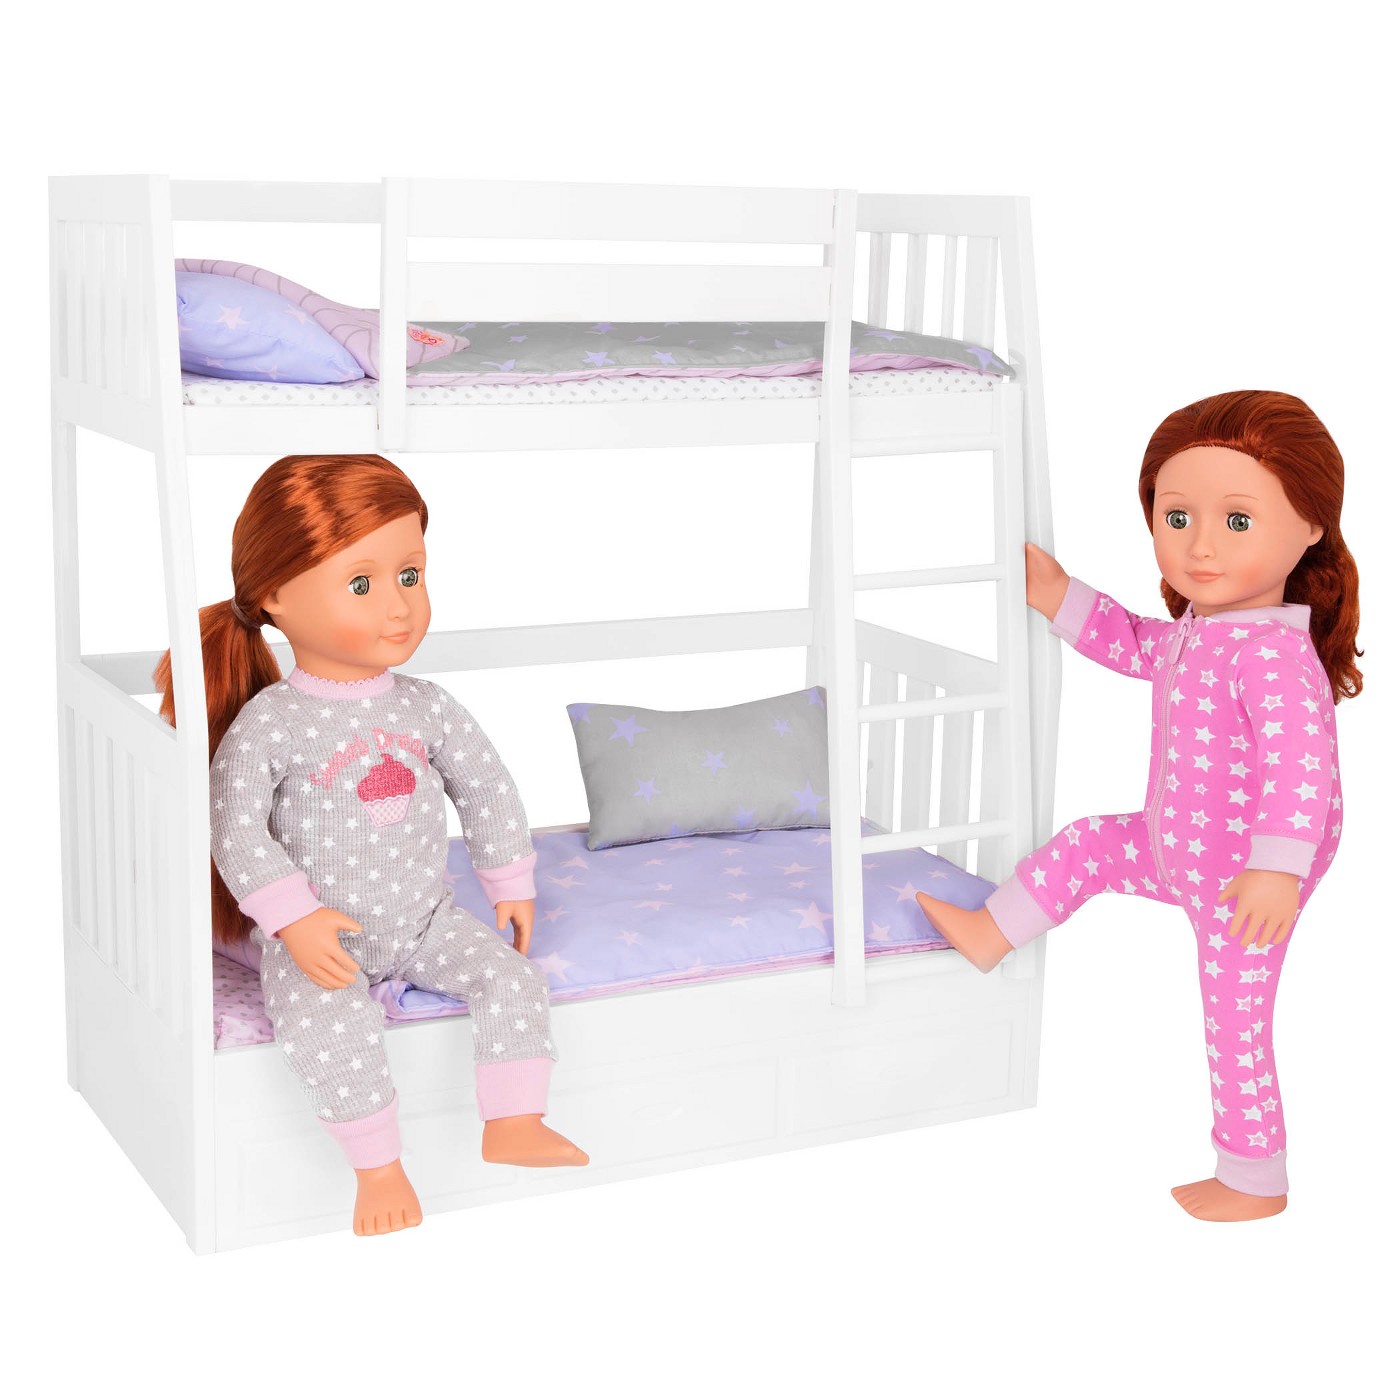 Our Generation Dream Bunks - Bunk Beds for 18" Dolls - image 3 of 4